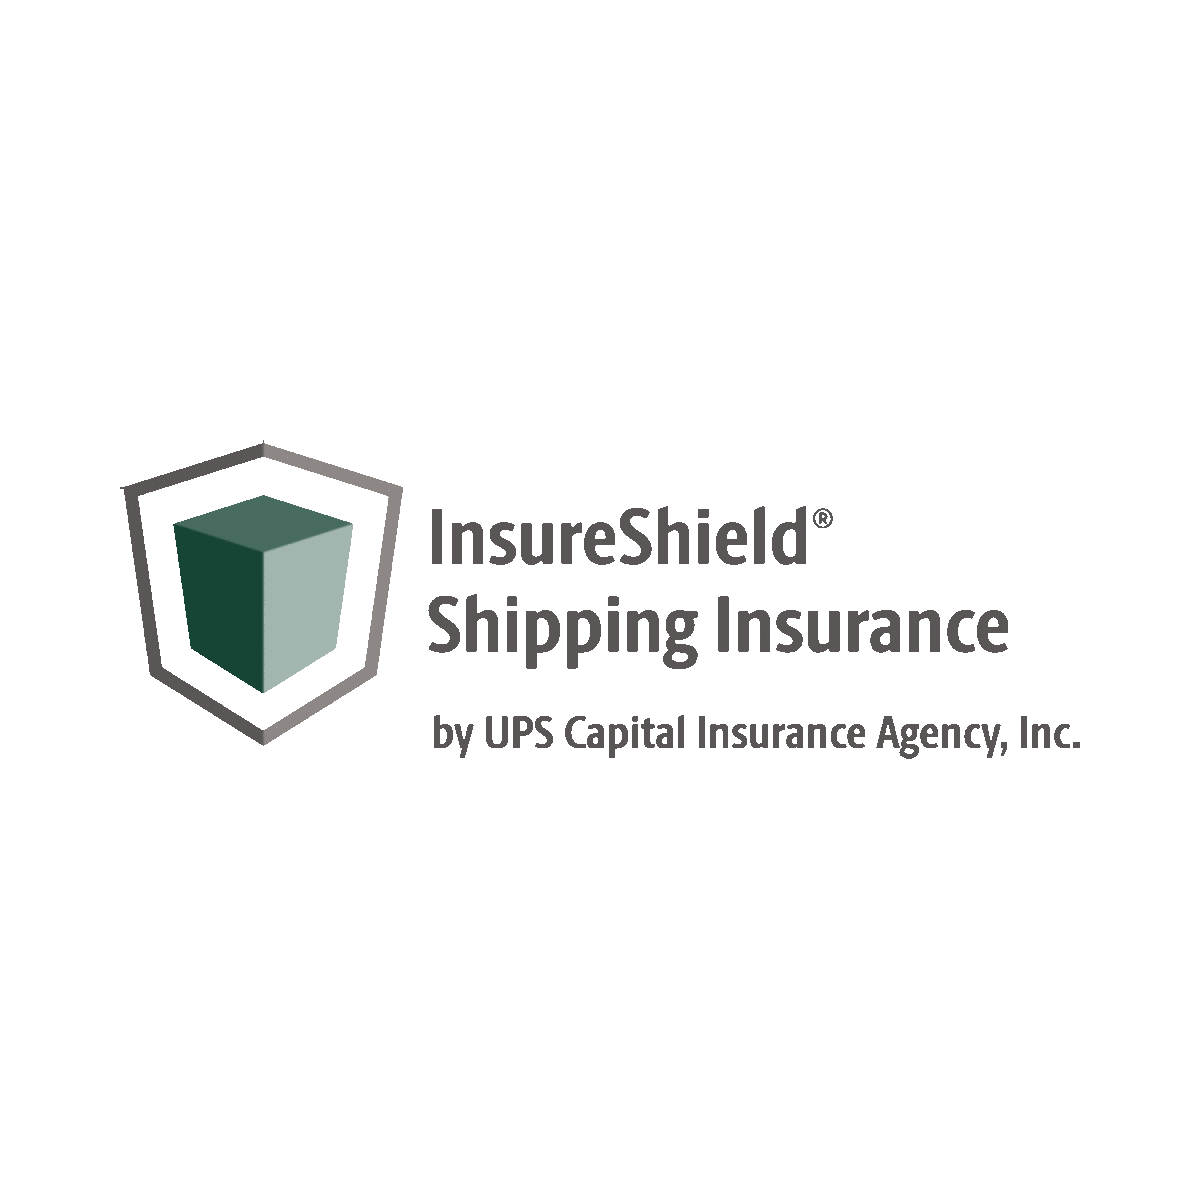 InsureShield® Shipping Insurance - Rich And Pour